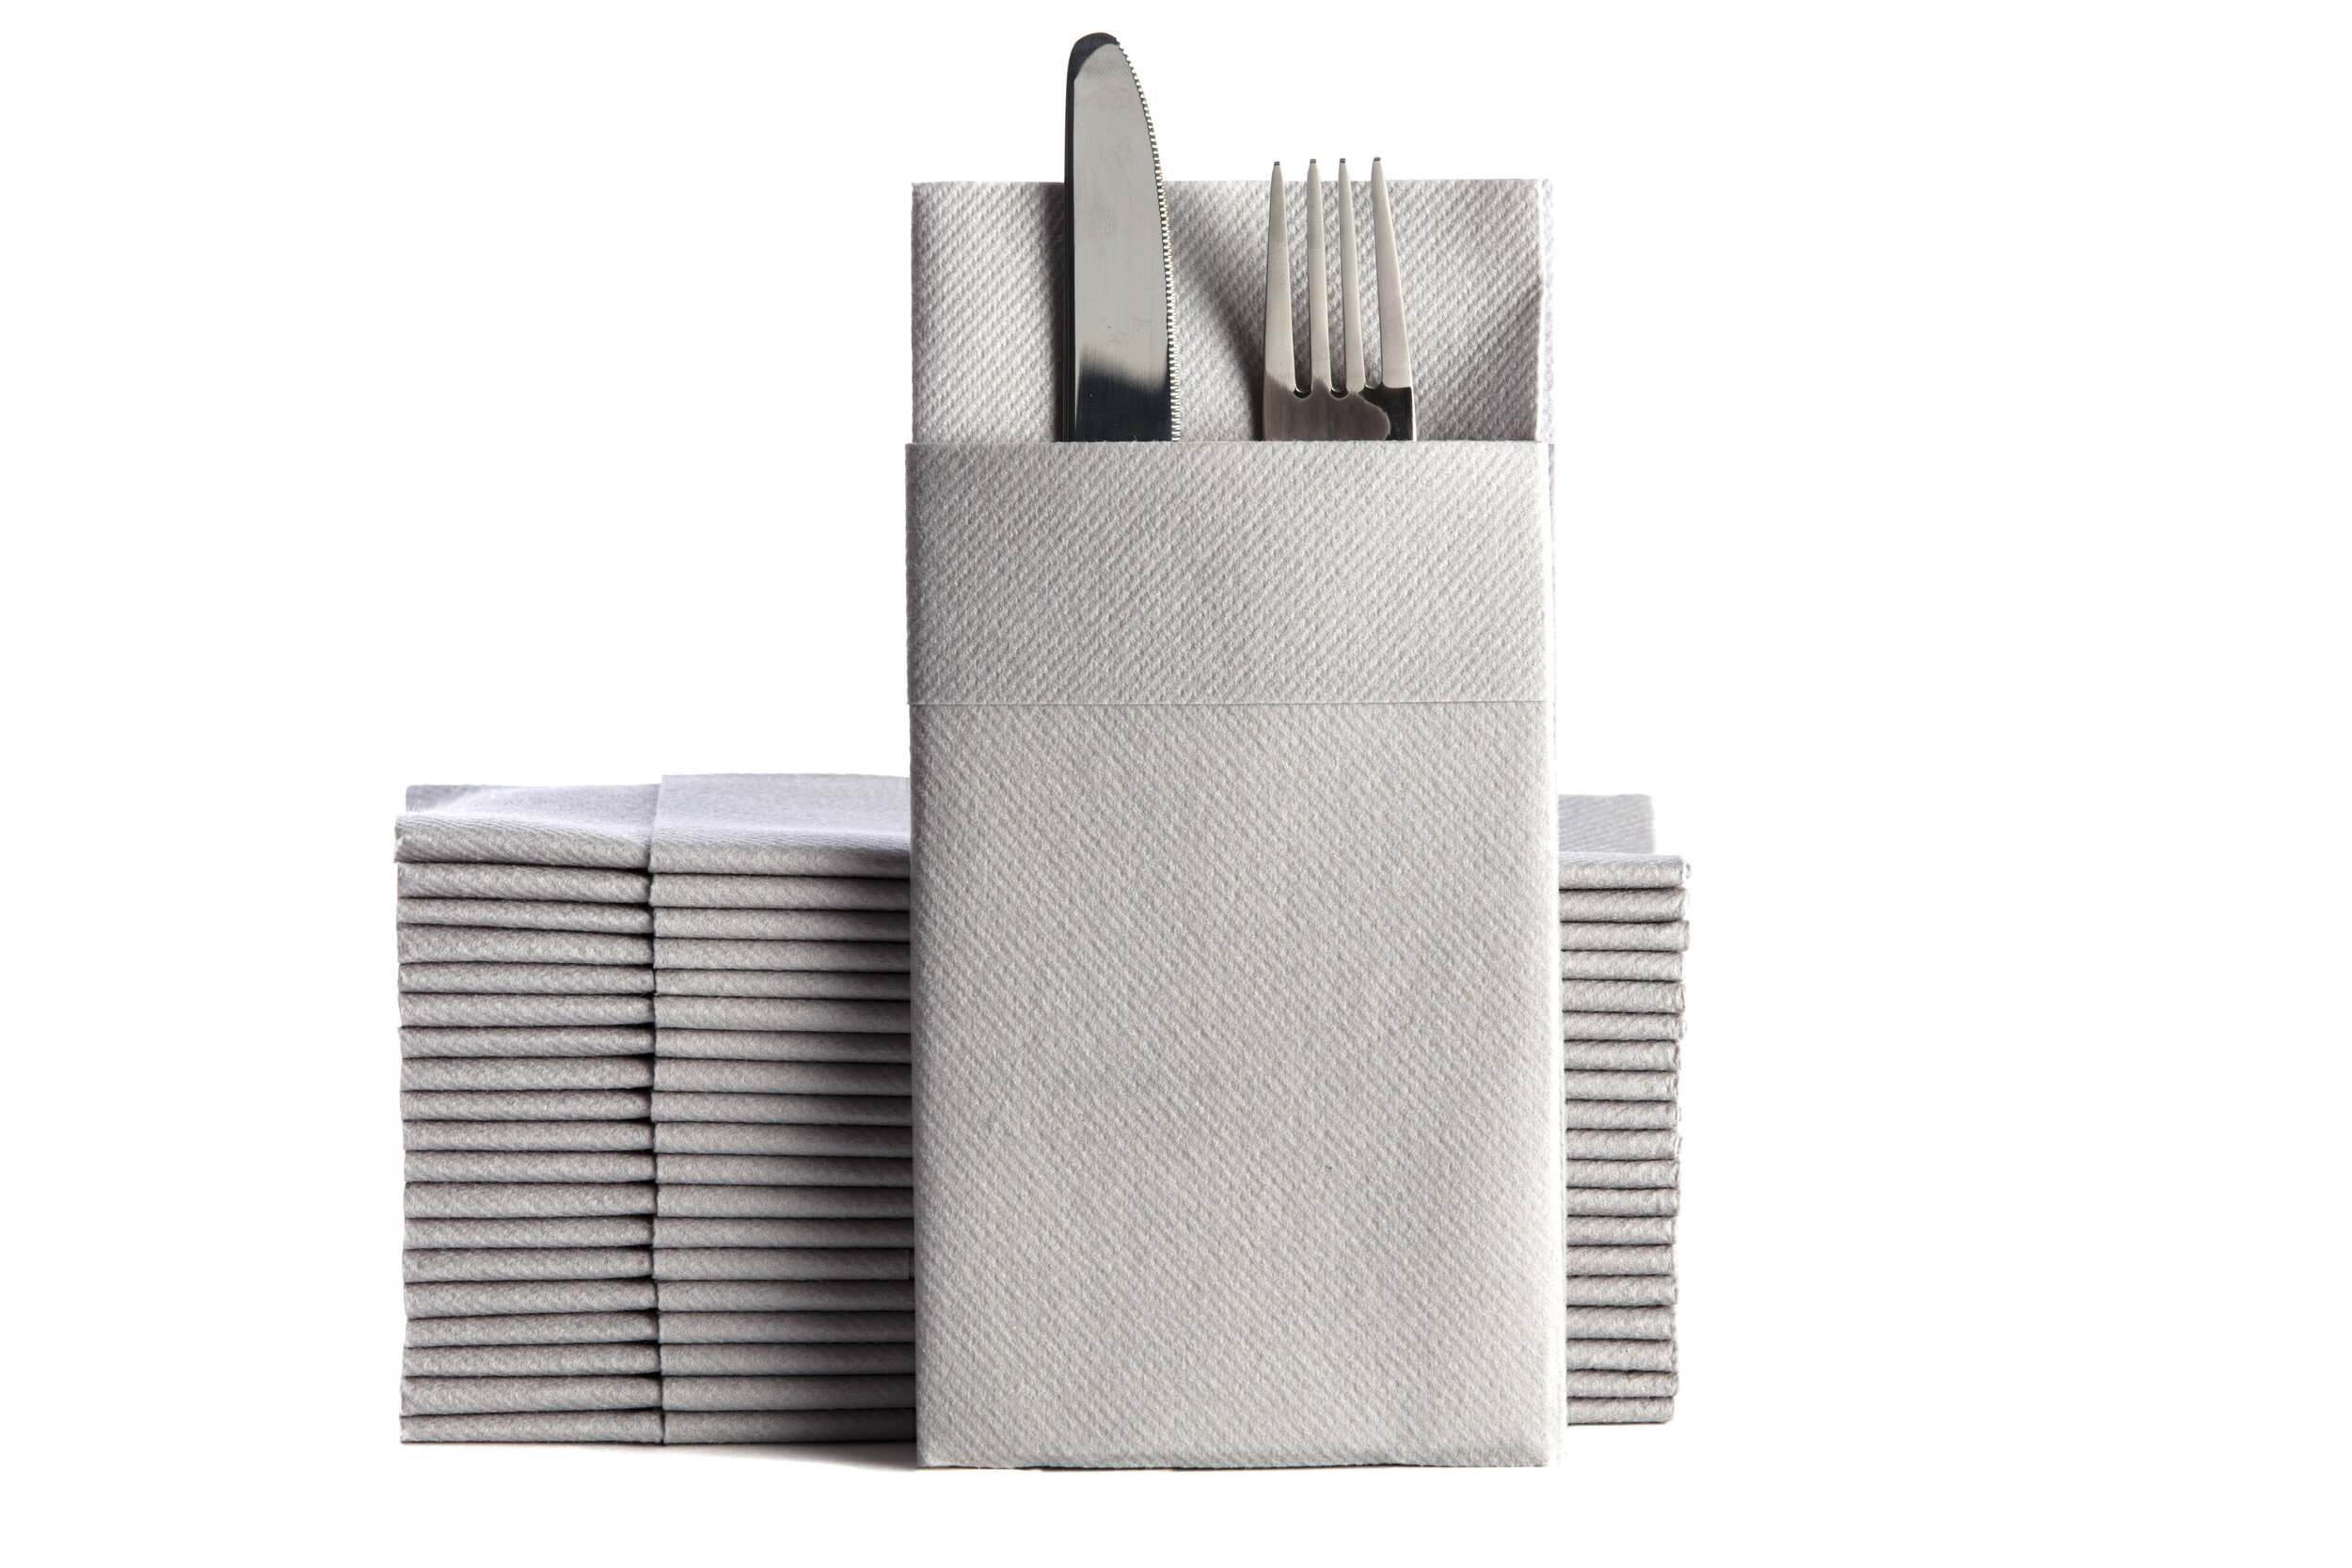 Moyes Home, Baby Blue Pre-Folded Pocket Napkins, Linen-Feel Disposable  Airlaid Napkins for Kitchen, Bathroom, Parties, Weddings, Dinners or Events  , 8 x 4 Inches Folded Size, Pack of 50 